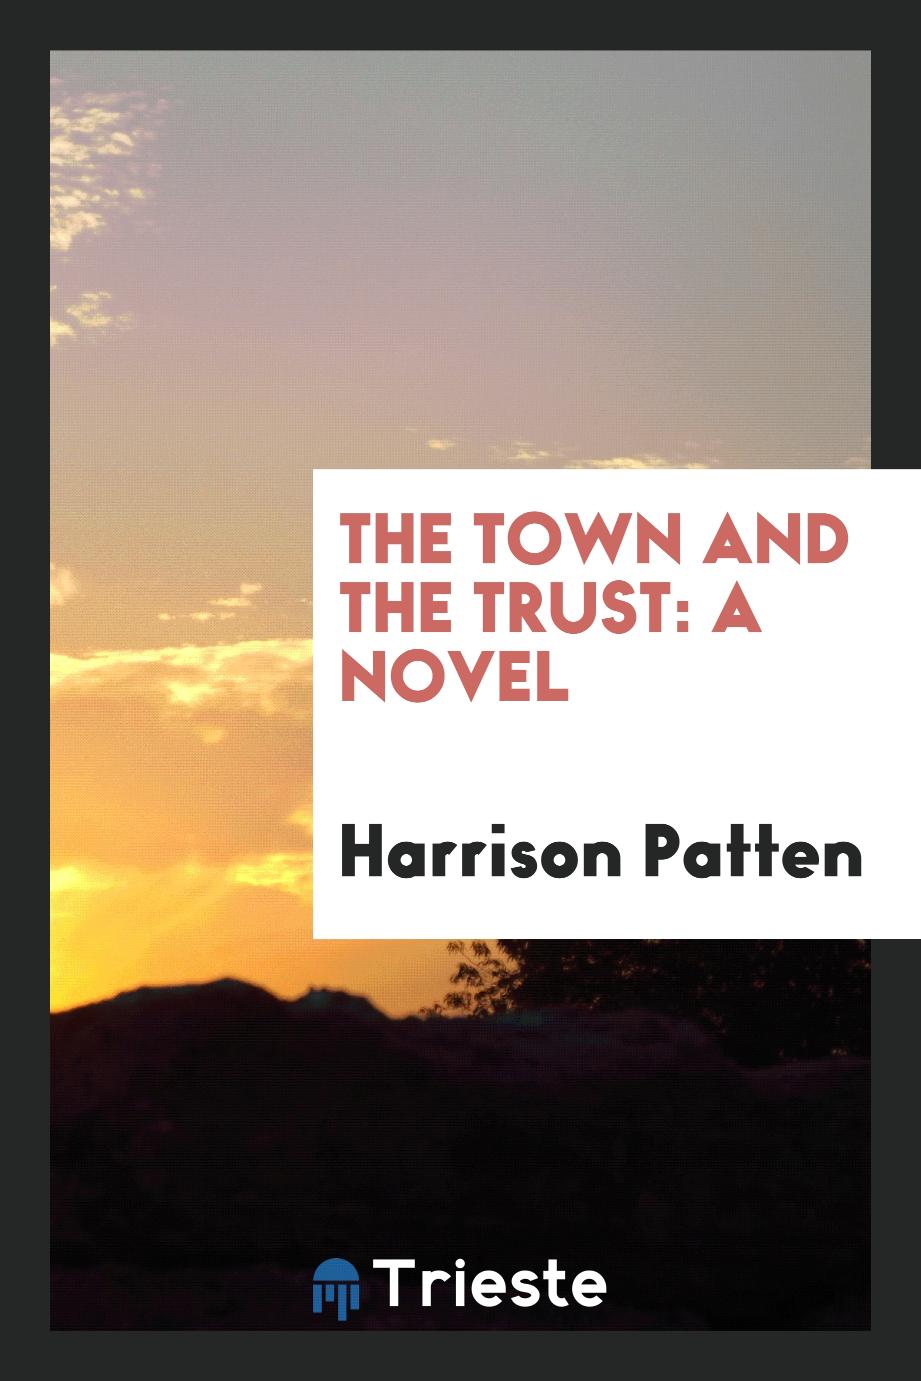 The Town and the Trust: A Novel